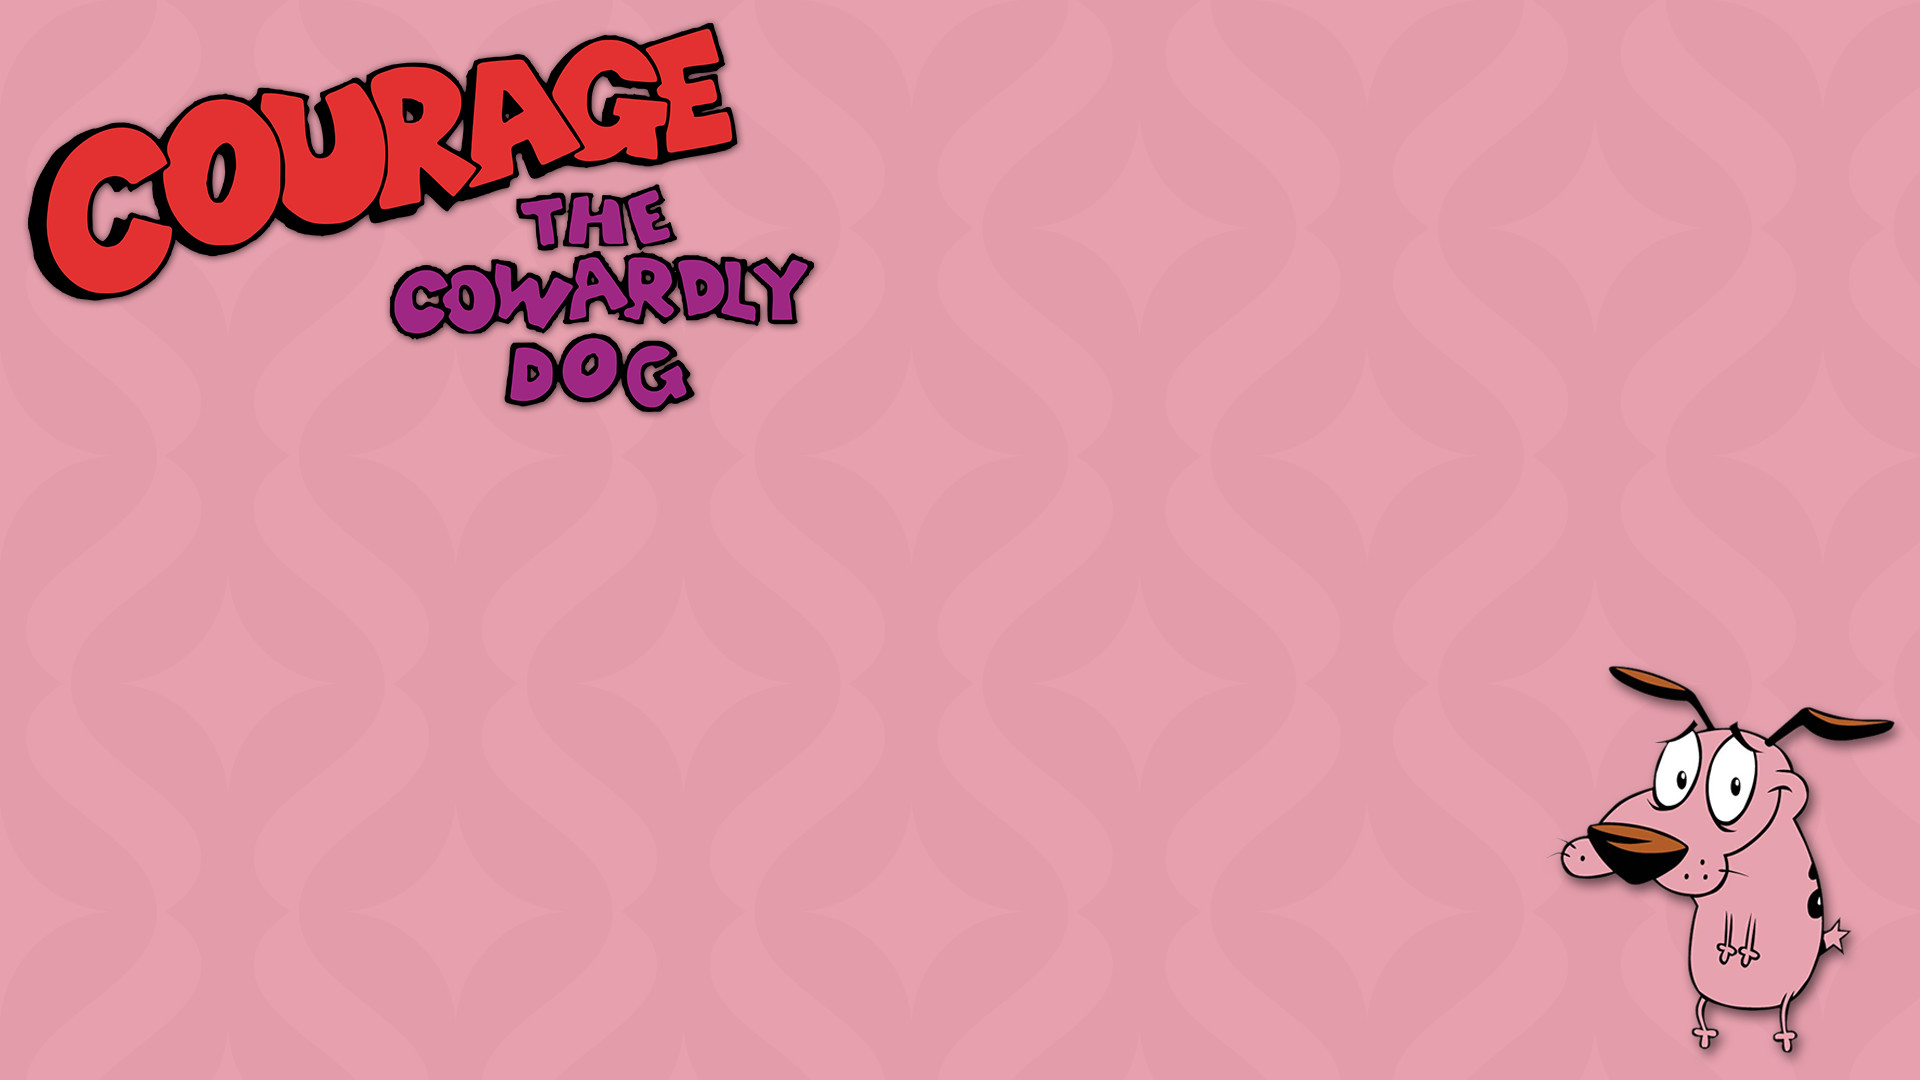 1920x1080 Courage the cowardly dog HD Wallpaper | Background Image |  |  ID:910156 - Wallpaper Abyss